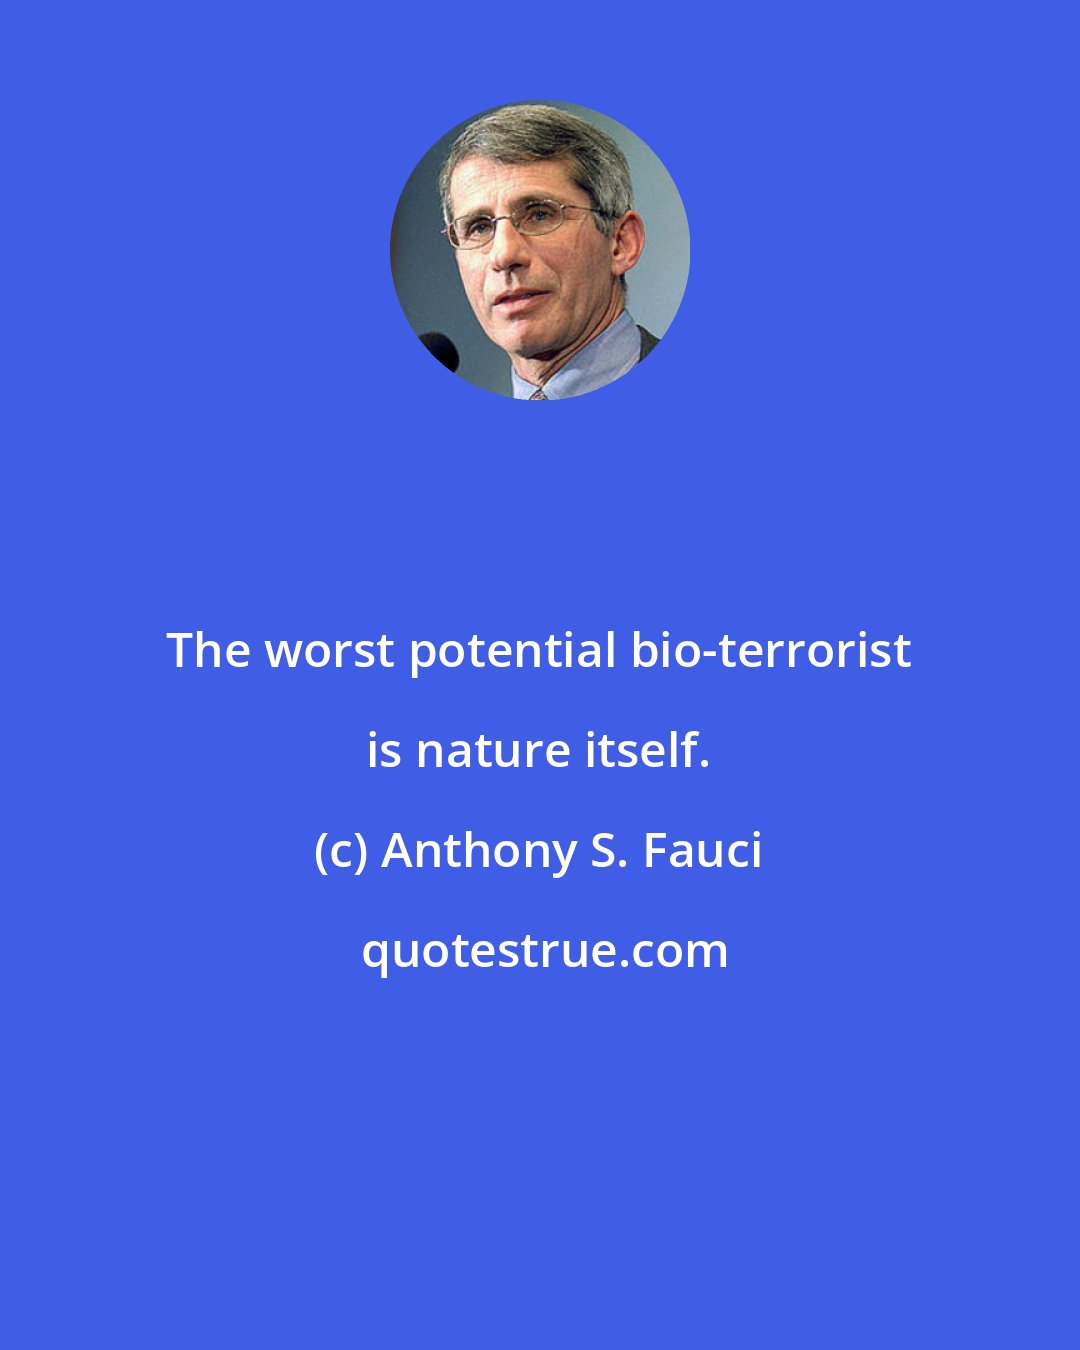 Anthony S. Fauci: The worst potential bio-terrorist is nature itself.